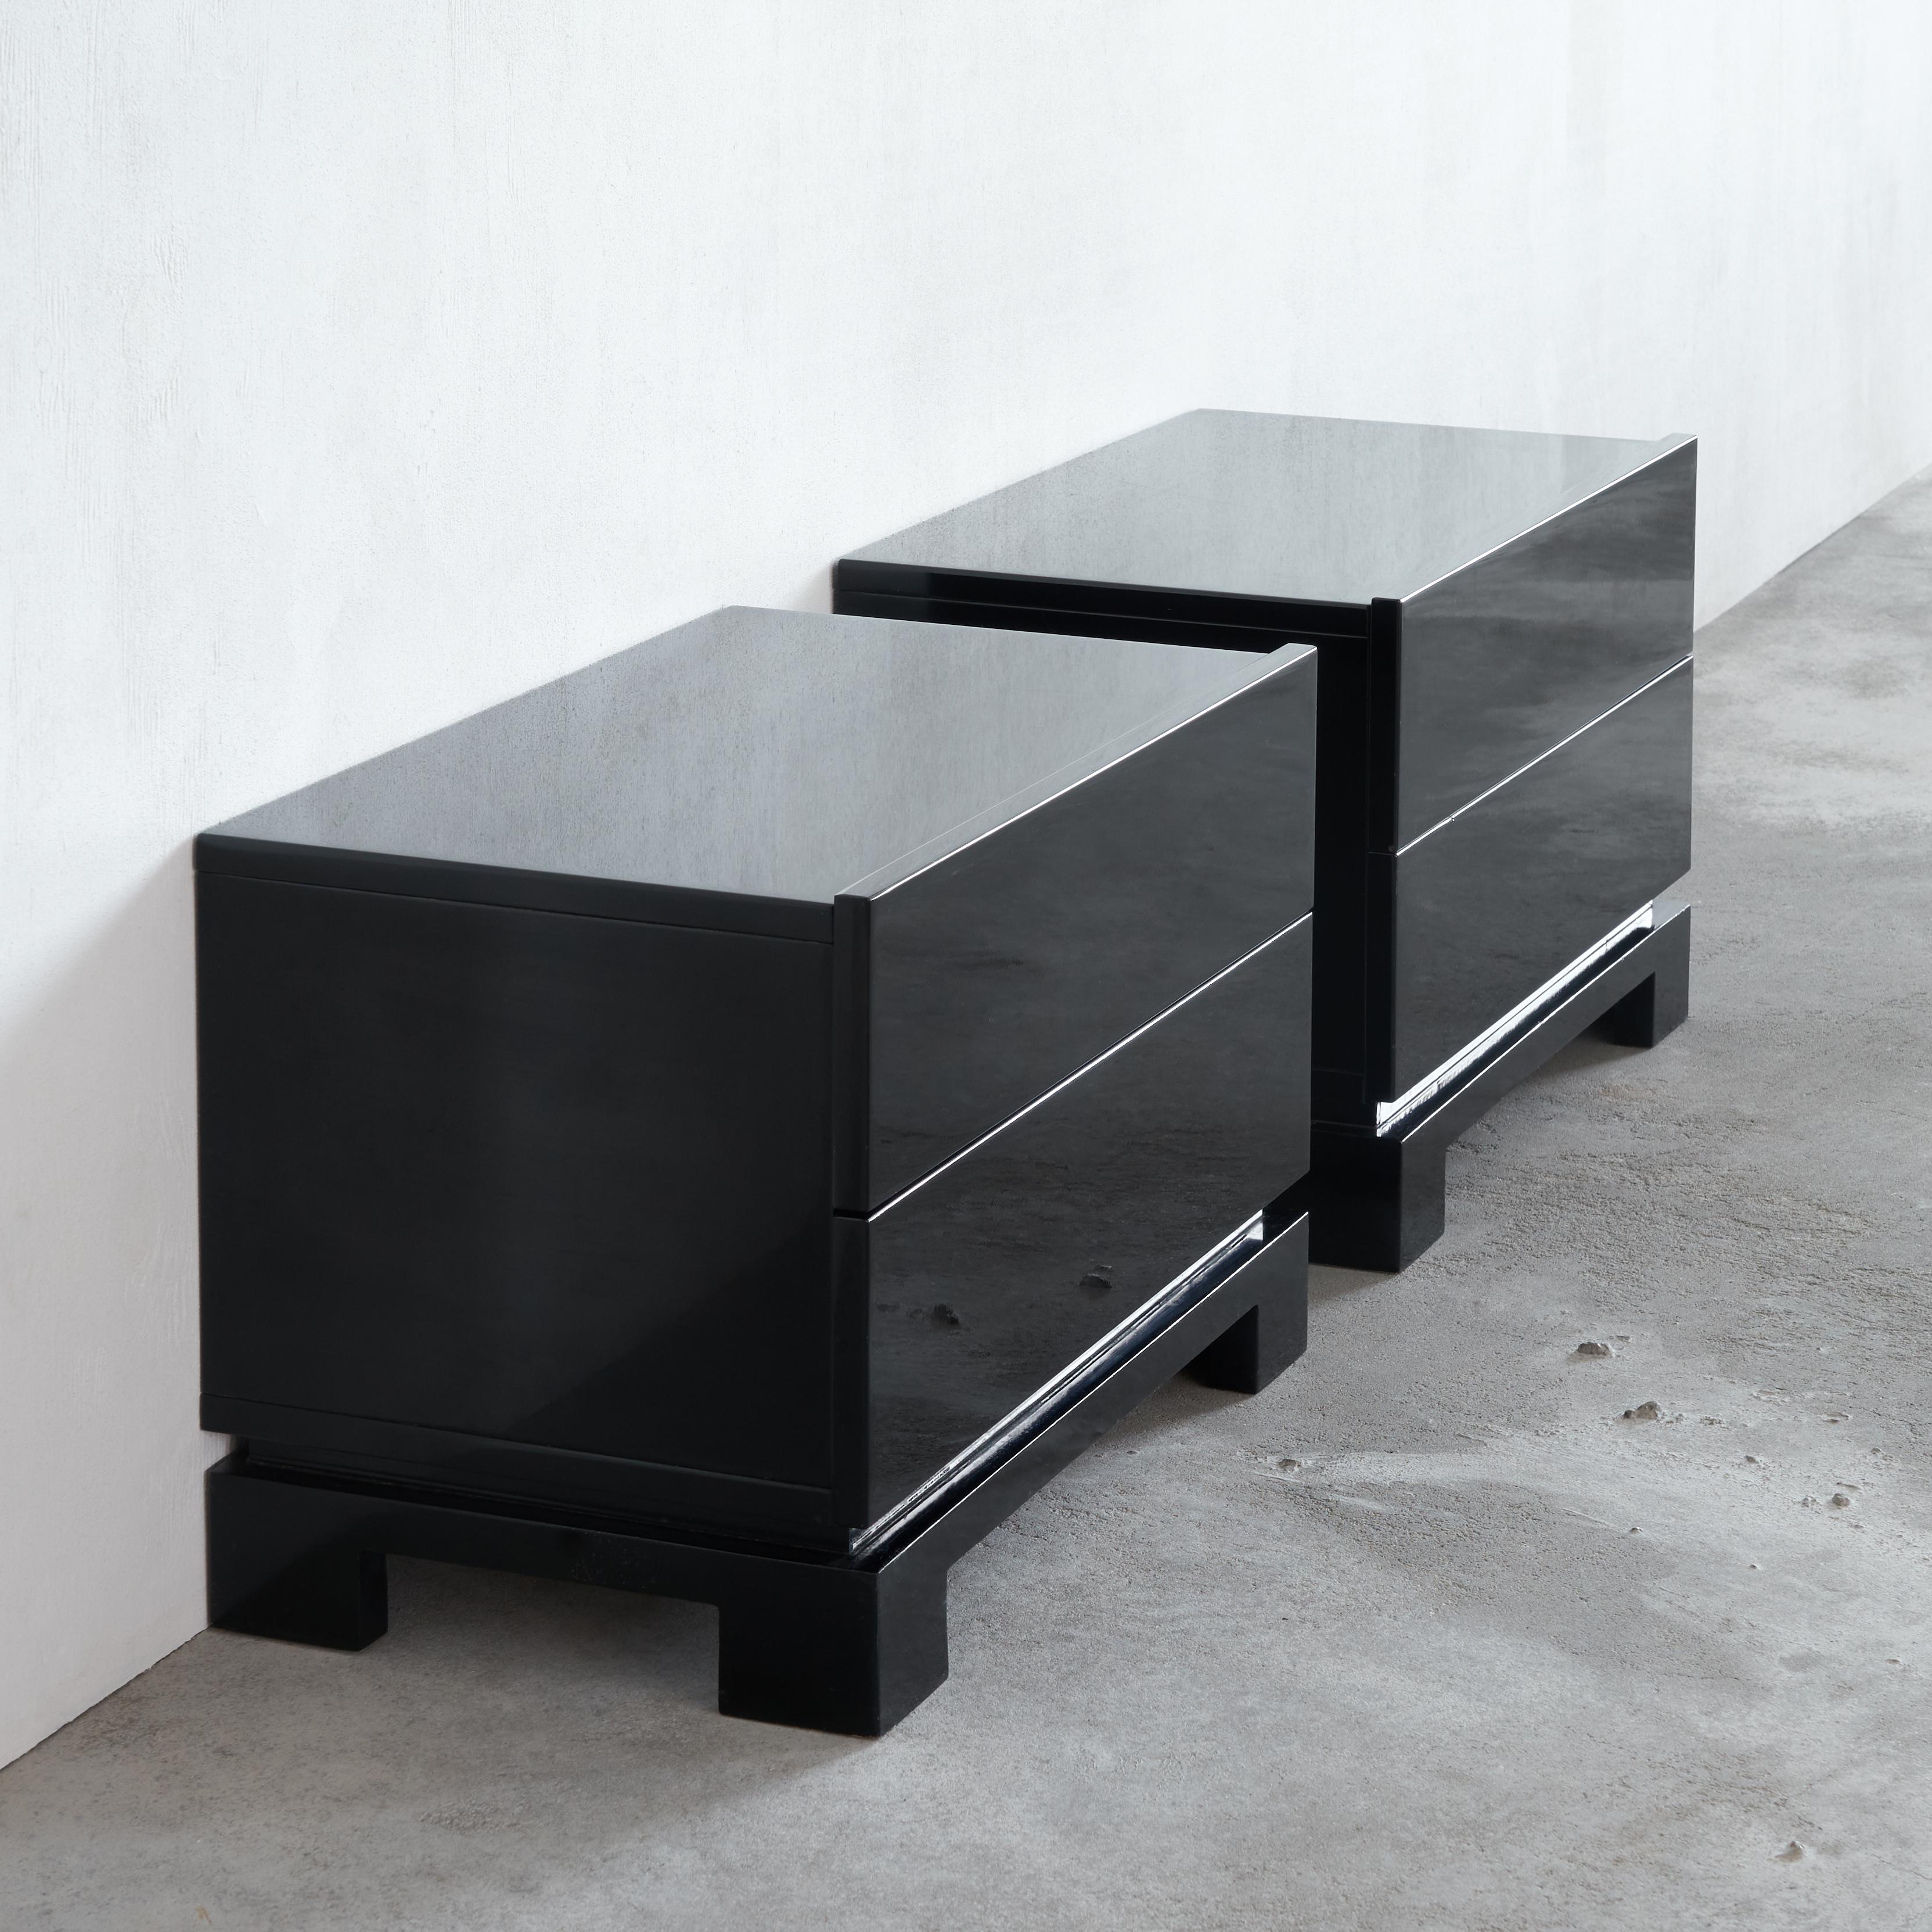 Emiel Veranneman Exquisite pair of high gloss cabinets, Belgium, 70s or 80s. 

This stylish pair of cabinets by famous Belgian designer and artist Emiel Veranneman. These cabinets have sturdy lines and perfect proportions. The lavish use of black